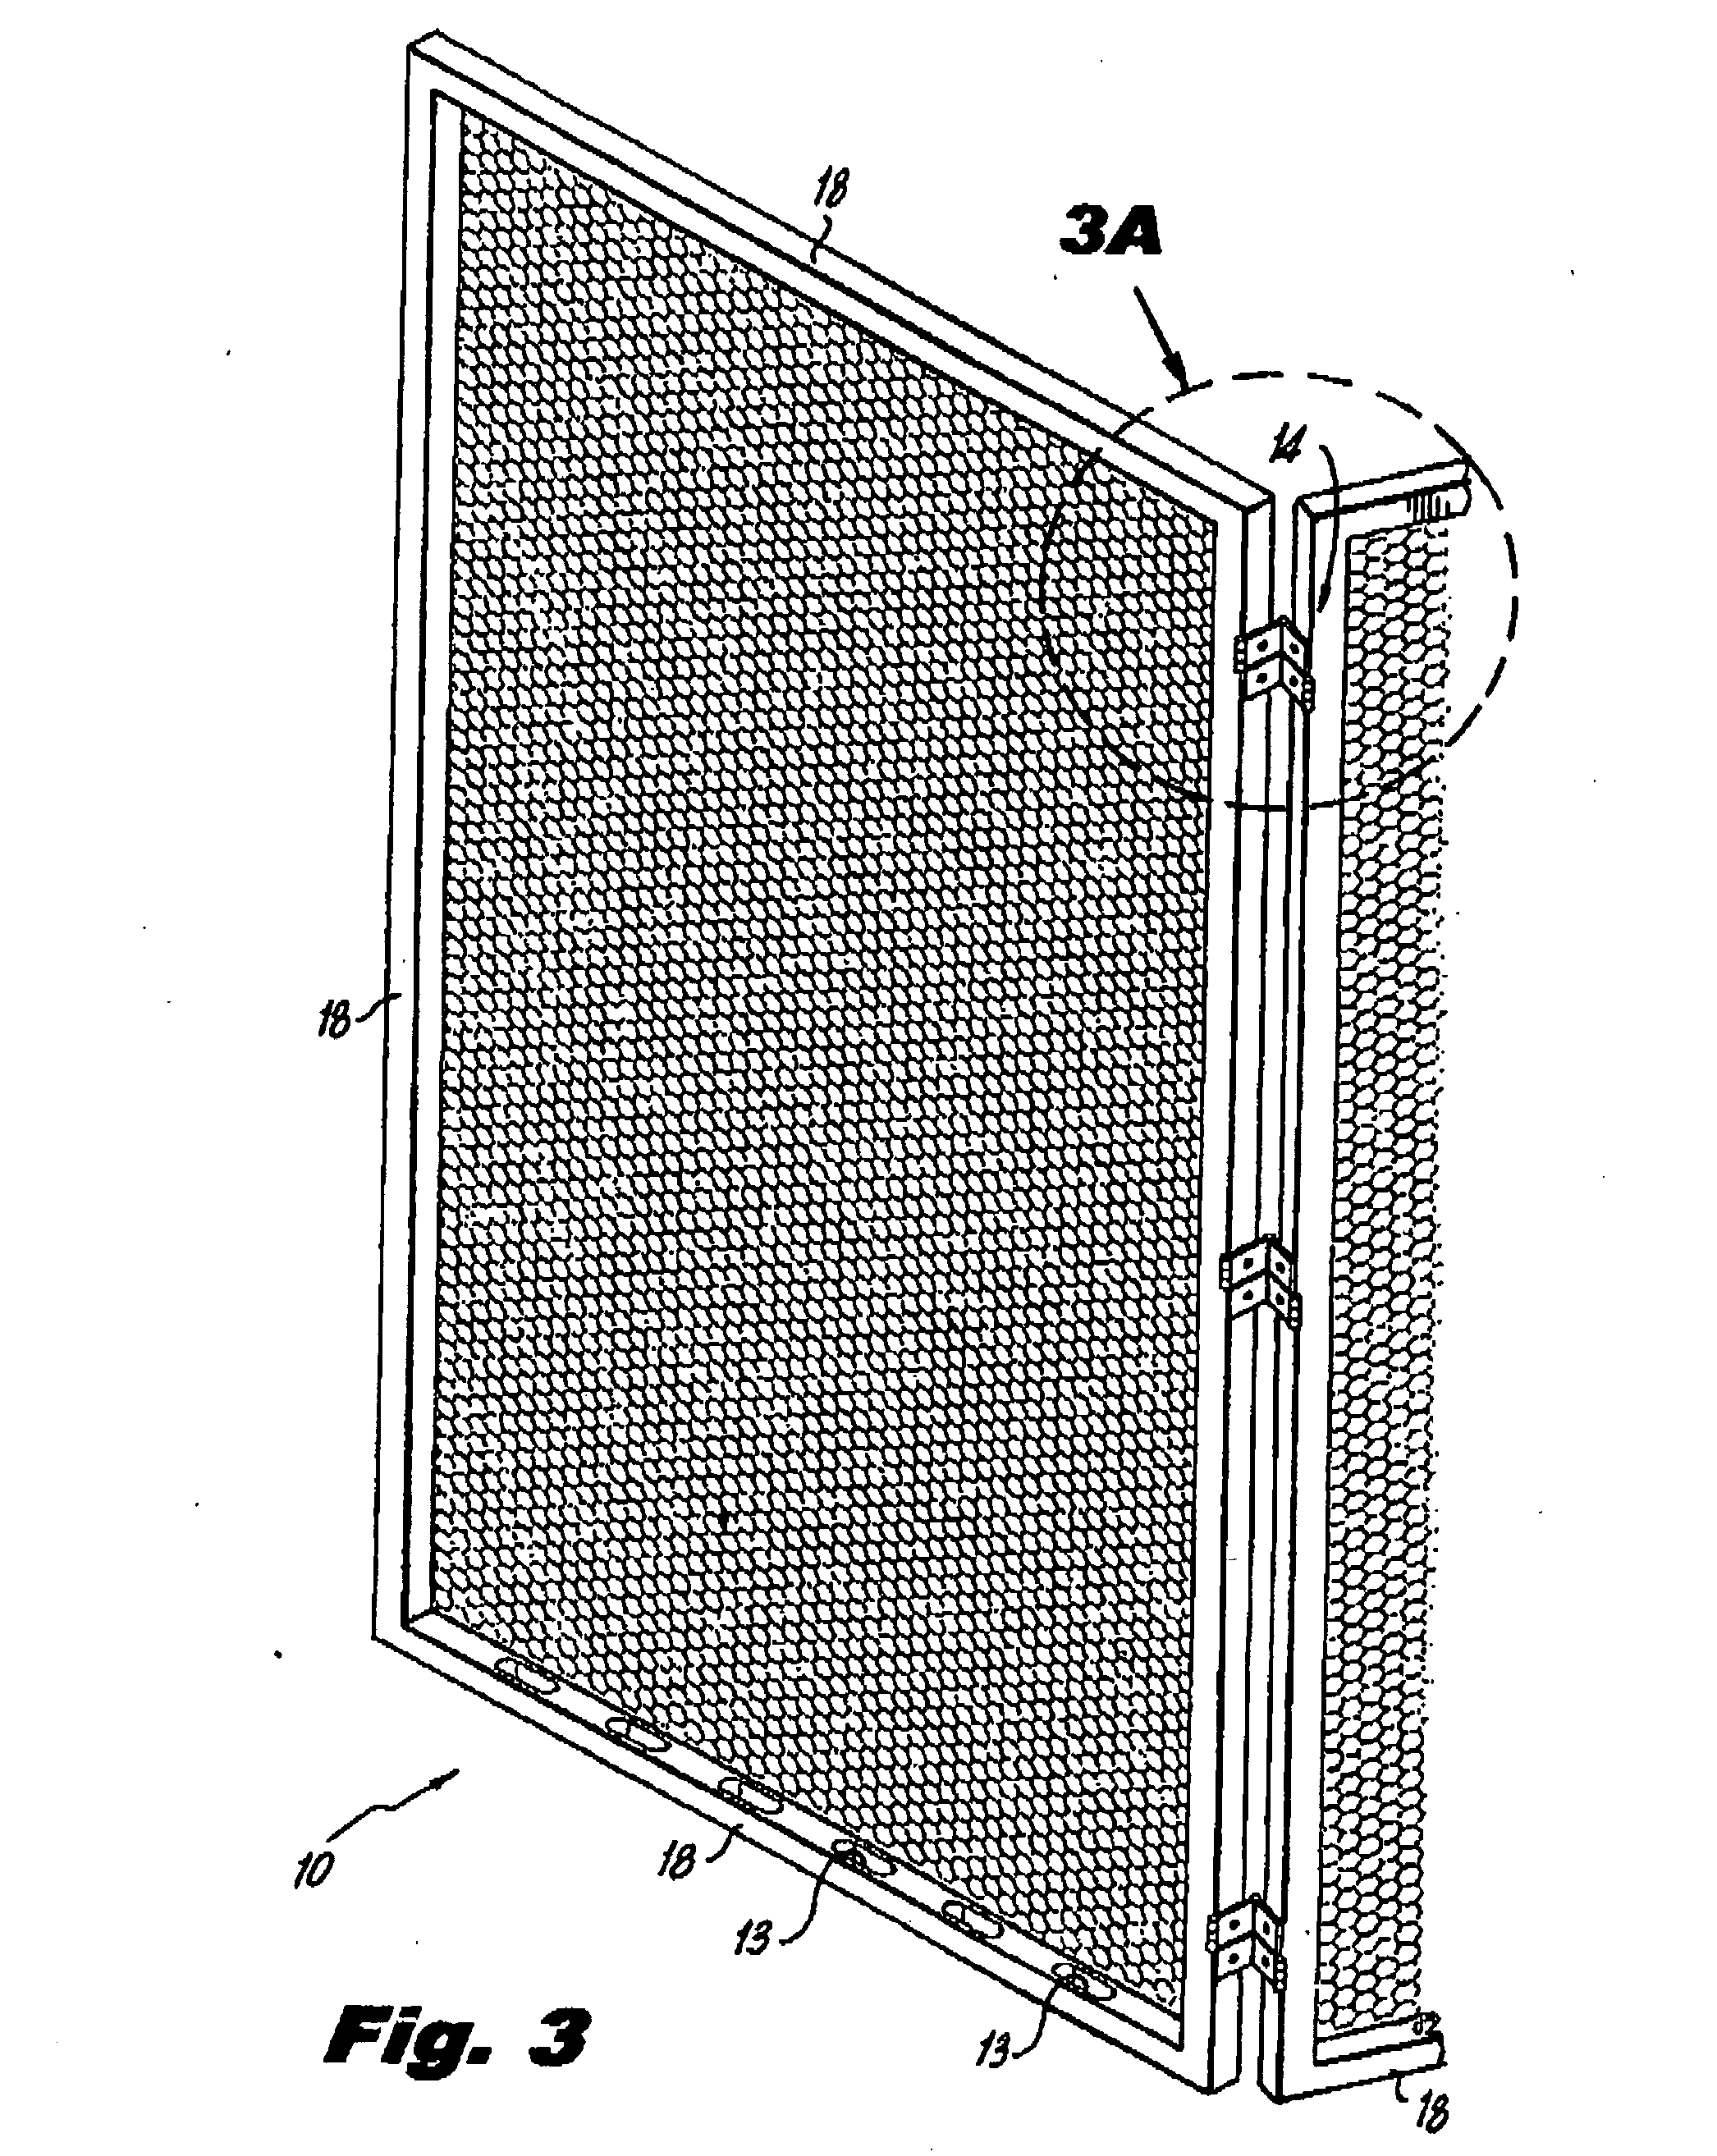 Method of using clips for retrofit installation of a portable swimming pool barrier fence